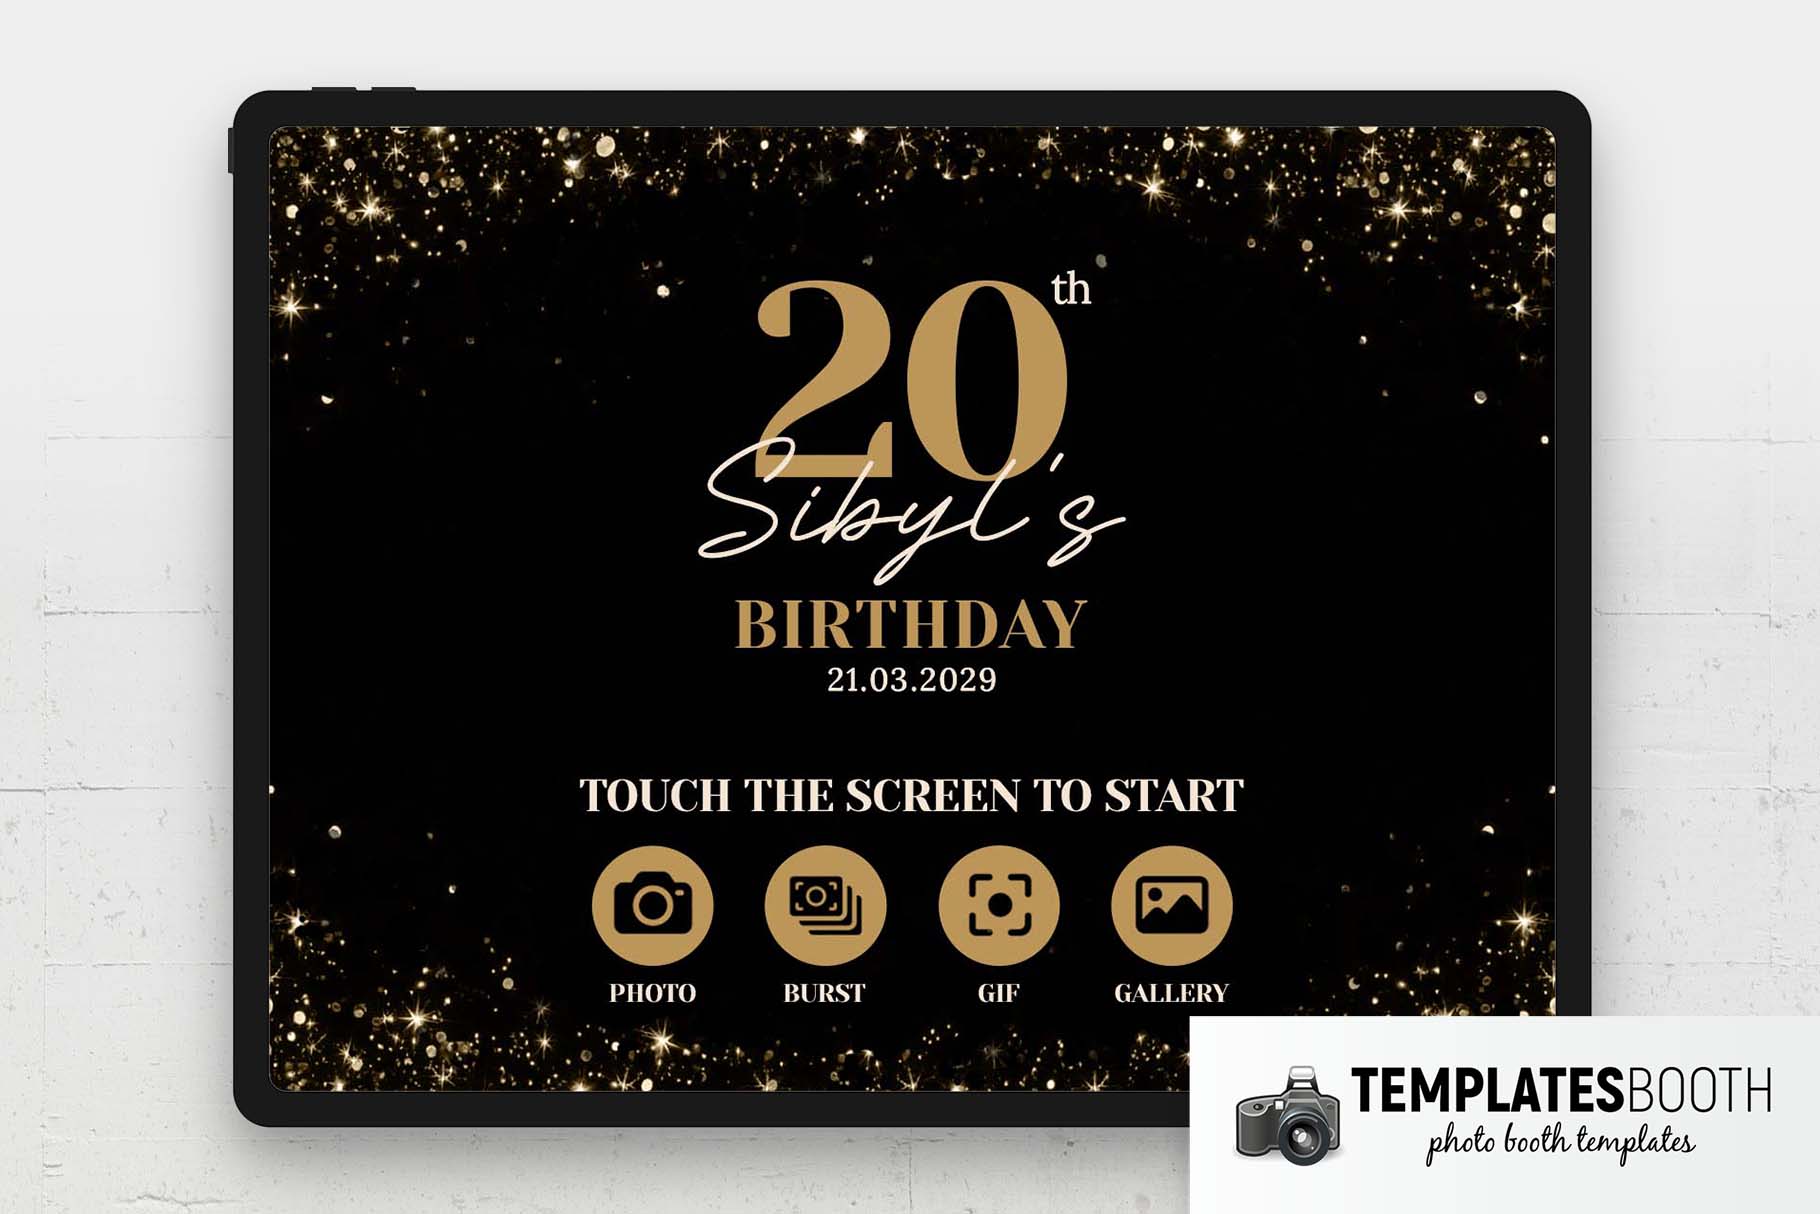 20th Birthday Photo Booth Welcome Screen